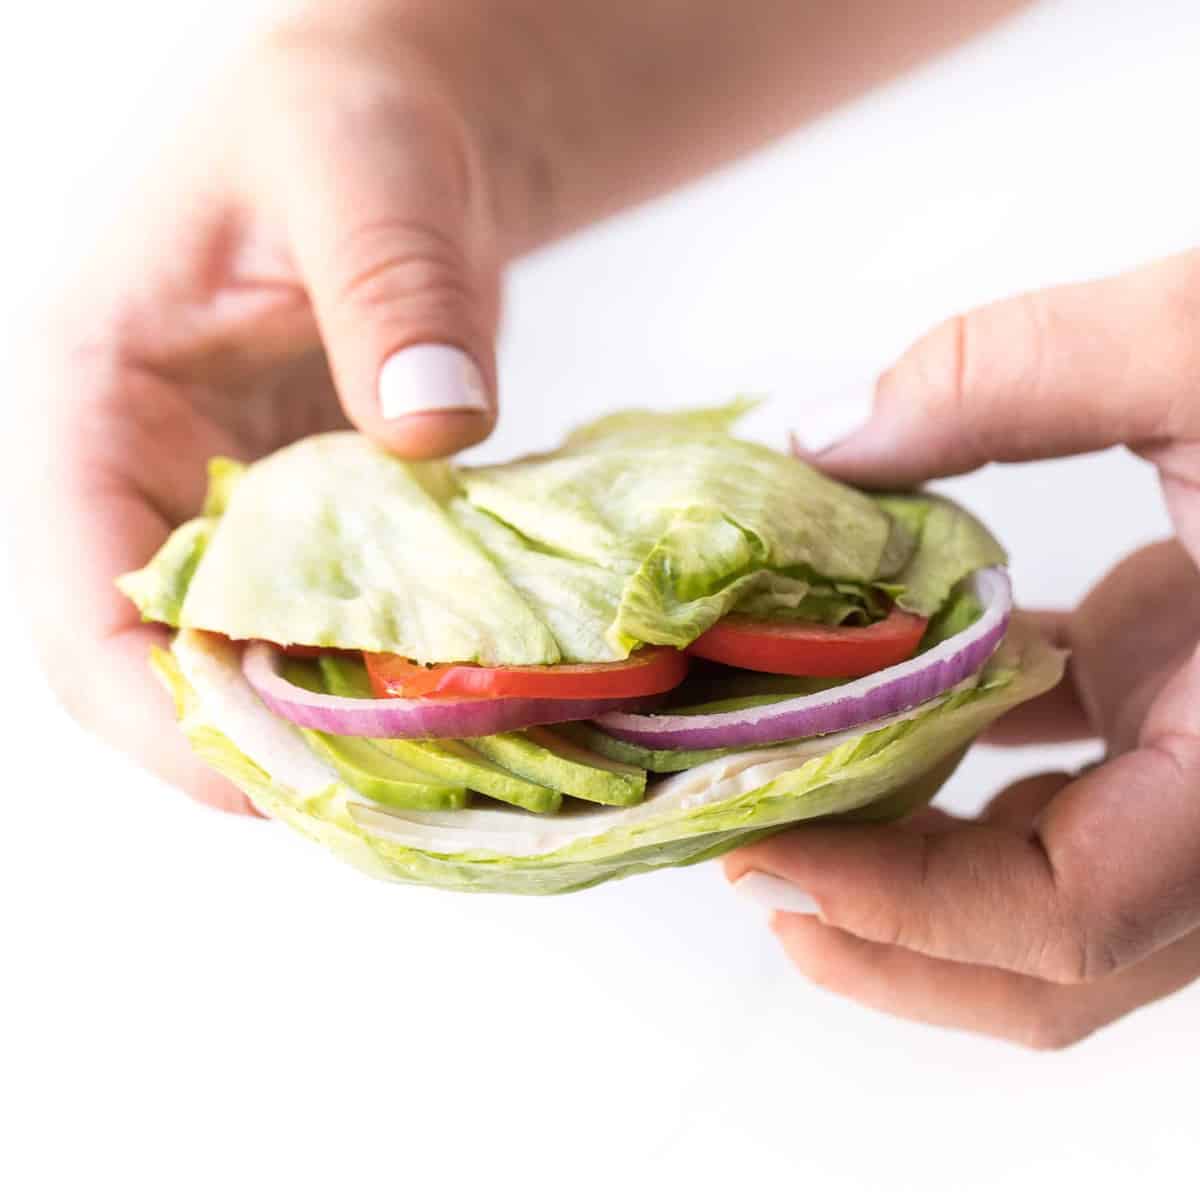 a hand holding two slices of iceberg lettuce as a "bun" with avocado, tomato, and red onions inside